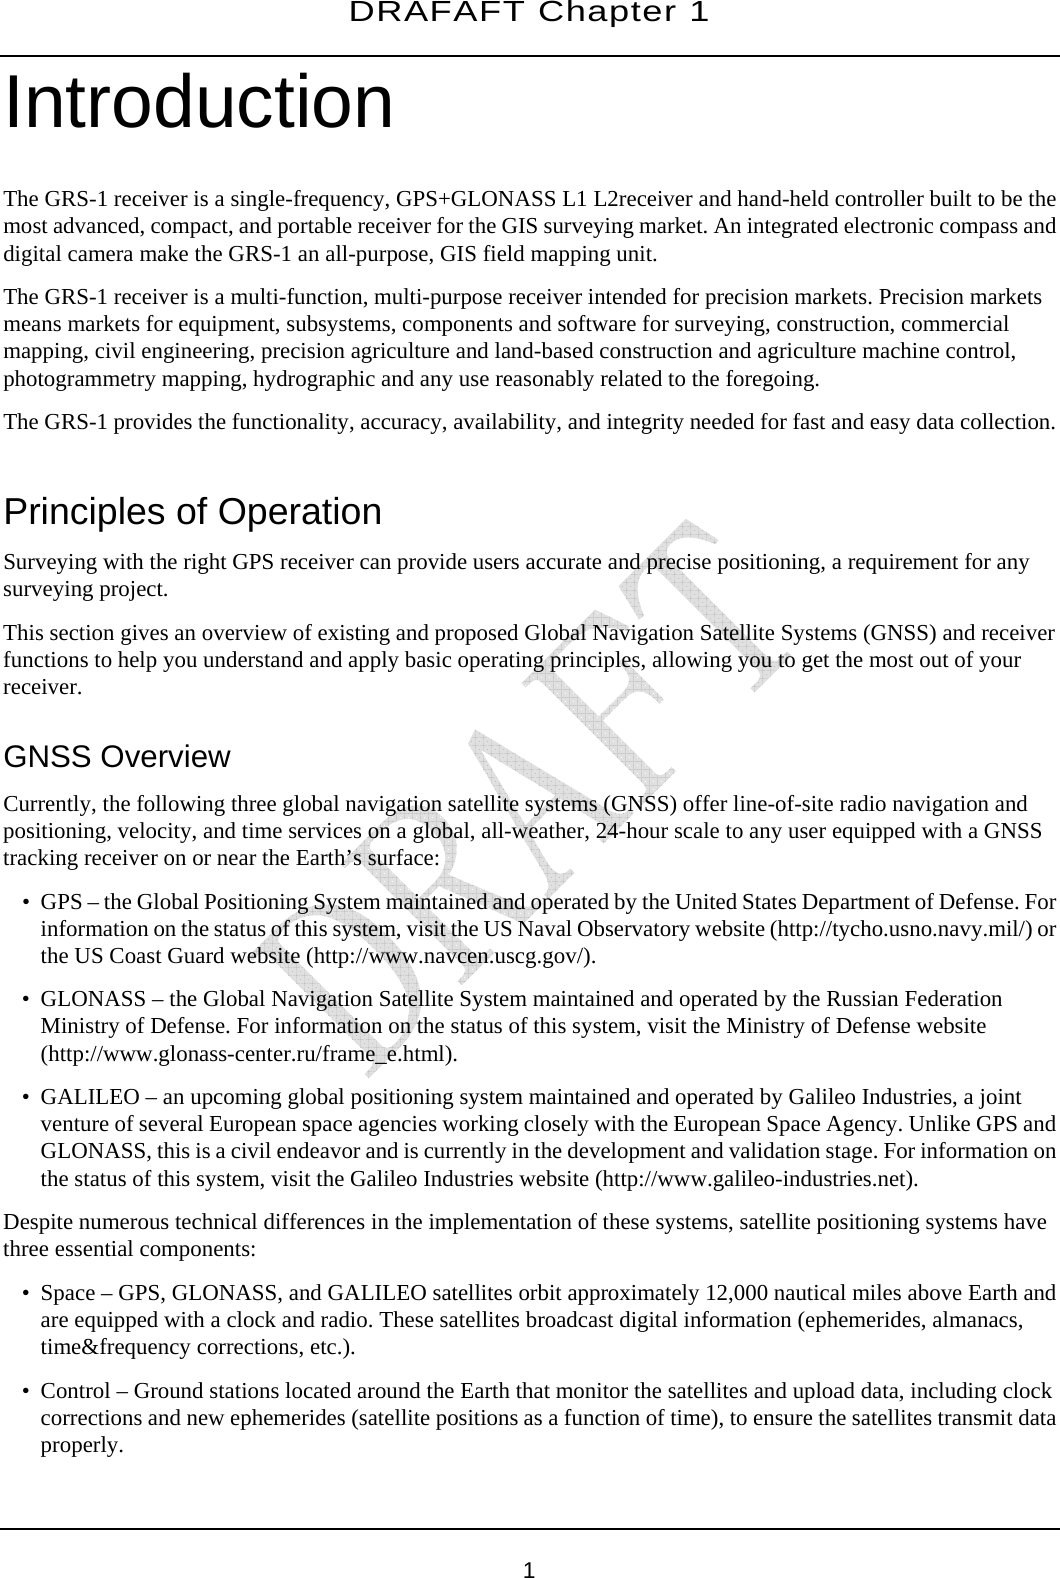 DRAFAFT Chapter 1       1 Introduction The GRS-1 receiver is a single-frequency, GPS+GLONASS L1 L2receiver and hand-held controller built to be the most advanced, compact, and portable receiver for the GIS surveying market. An integrated electronic compass and digital camera make the GRS-1 an all-purpose, GIS field mapping unit. The GRS-1 receiver is a multi-function, multi-purpose receiver intended for precision markets. Precision markets means markets for equipment, subsystems, components and software for surveying, construction, commercial mapping, civil engineering, precision agriculture and land-based construction and agriculture machine control, photogrammetry mapping, hydrographic and any use reasonably related to the foregoing. The GRS-1 provides the functionality, accuracy, availability, and integrity needed for fast and easy data collection.  Principles of Operation Surveying with the right GPS receiver can provide users accurate and precise positioning, a requirement for any surveying project. This section gives an overview of existing and proposed Global Navigation Satellite Systems (GNSS) and receiver functions to help you understand and apply basic operating principles, allowing you to get the most out of your receiver. GNSS Overview Currently, the following three global navigation satellite systems (GNSS) offer line-of-site radio navigation and positioning, velocity, and time services on a global, all-weather, 24-hour scale to any user equipped with a GNSS tracking receiver on or near the Earth’s surface: • GPS – the Global Positioning System maintained and operated by the United States Department of Defense. For information on the status of this system, visit the US Naval Observatory website (http://tycho.usno.navy.mil/) or the US Coast Guard website (http://www.navcen.uscg.gov/). • GLONASS – the Global Navigation Satellite System maintained and operated by the Russian Federation Ministry of Defense. For information on the status of this system, visit the Ministry of Defense website (http://www.glonass-center.ru/frame_e.html). • GALILEO – an upcoming global positioning system maintained and operated by Galileo Industries, a joint venture of several European space agencies working closely with the European Space Agency. Unlike GPS and GLONASS, this is a civil endeavor and is currently in the development and validation stage. For information on the status of this system, visit the Galileo Industries website (http://www.galileo-industries.net). Despite numerous technical differences in the implementation of these systems, satellite positioning systems have three essential components: • Space – GPS, GLONASS, and GALILEO satellites orbit approximately 12,000 nautical miles above Earth and are equipped with a clock and radio. These satellites broadcast digital information (ephemerides, almanacs, time&amp;frequency corrections, etc.). • Control – Ground stations located around the Earth that monitor the satellites and upload data, including clock corrections and new ephemerides (satellite positions as a function of time), to ensure the satellites transmit data properly. 